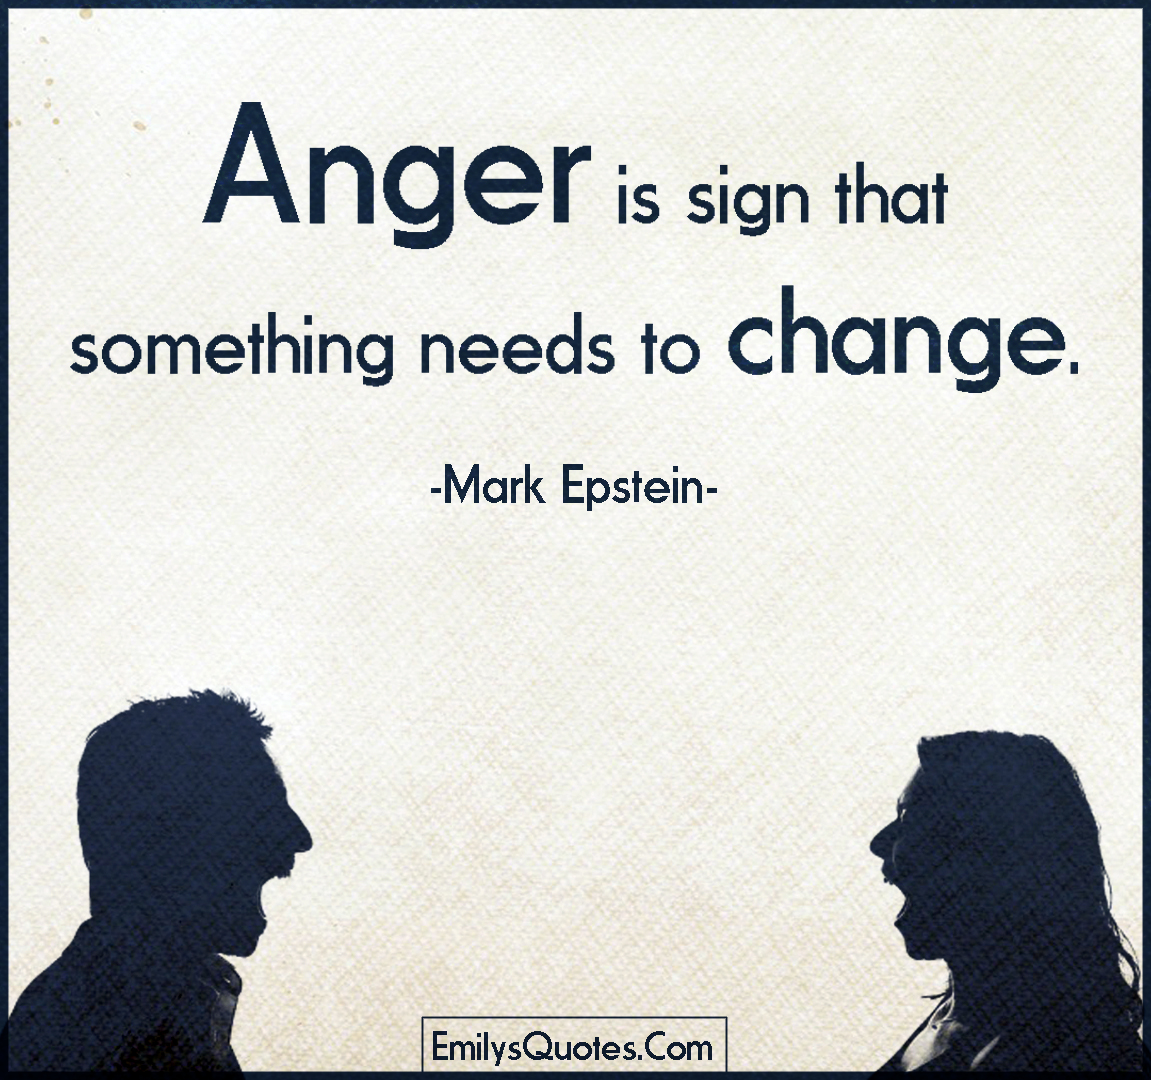 Anger is sign that something needs to change